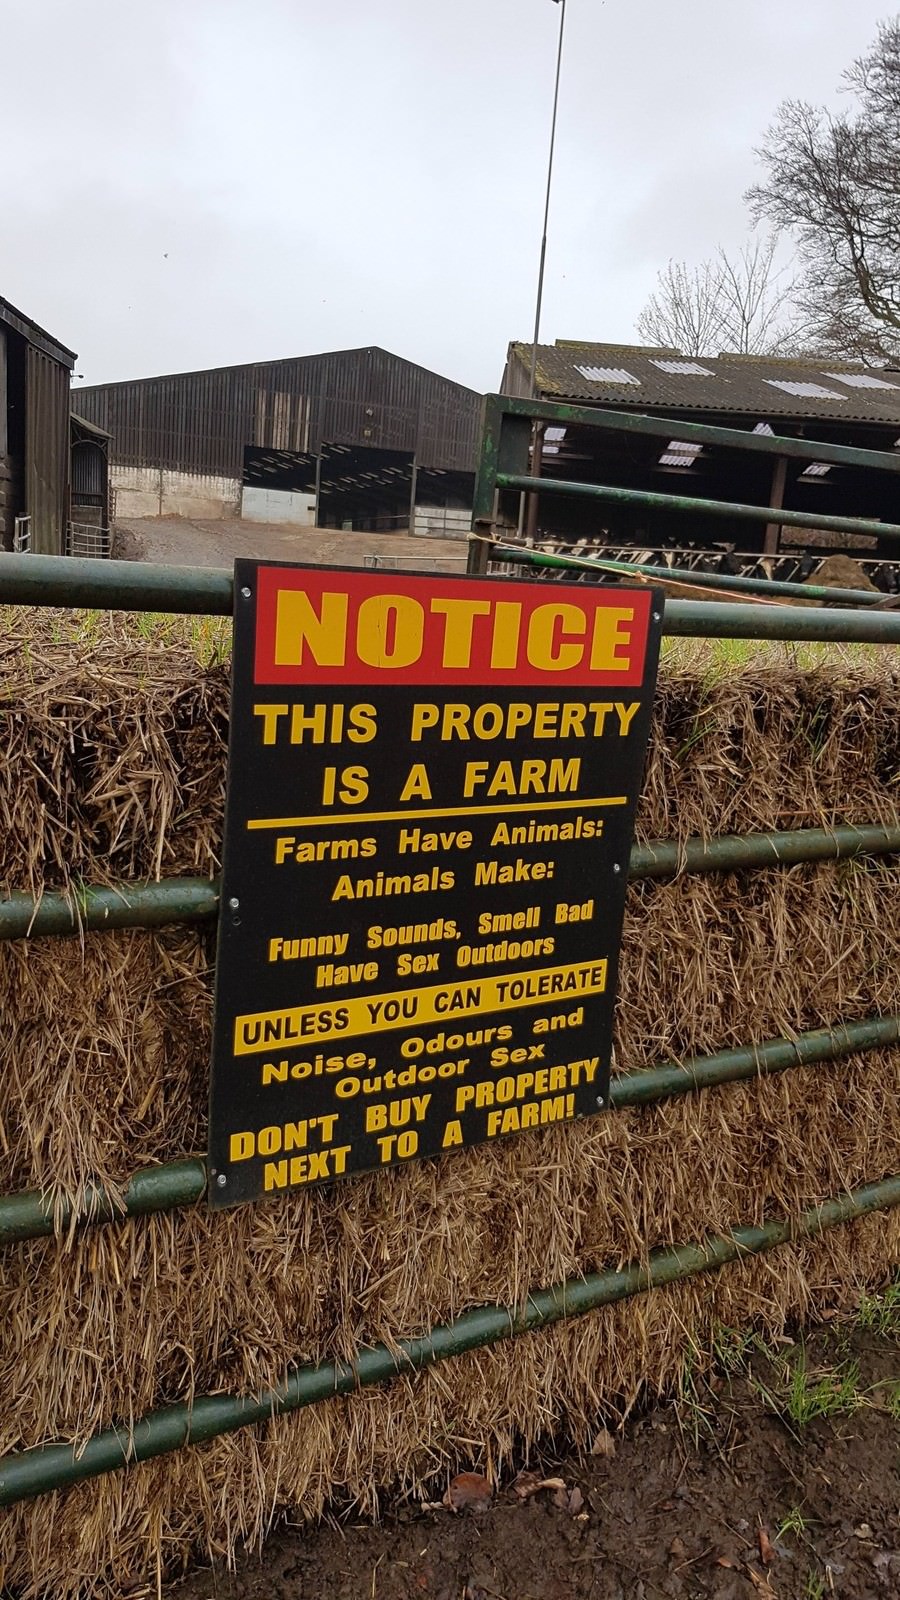 Humour - Notice This Property Is A Farm Farms Have Animals Animals Make Funny Sound Seil Bad Have Sex Gudans Unless You Can Tolerate Nolse, Odours and Outdoor de Don'T Buy Property To A Fami